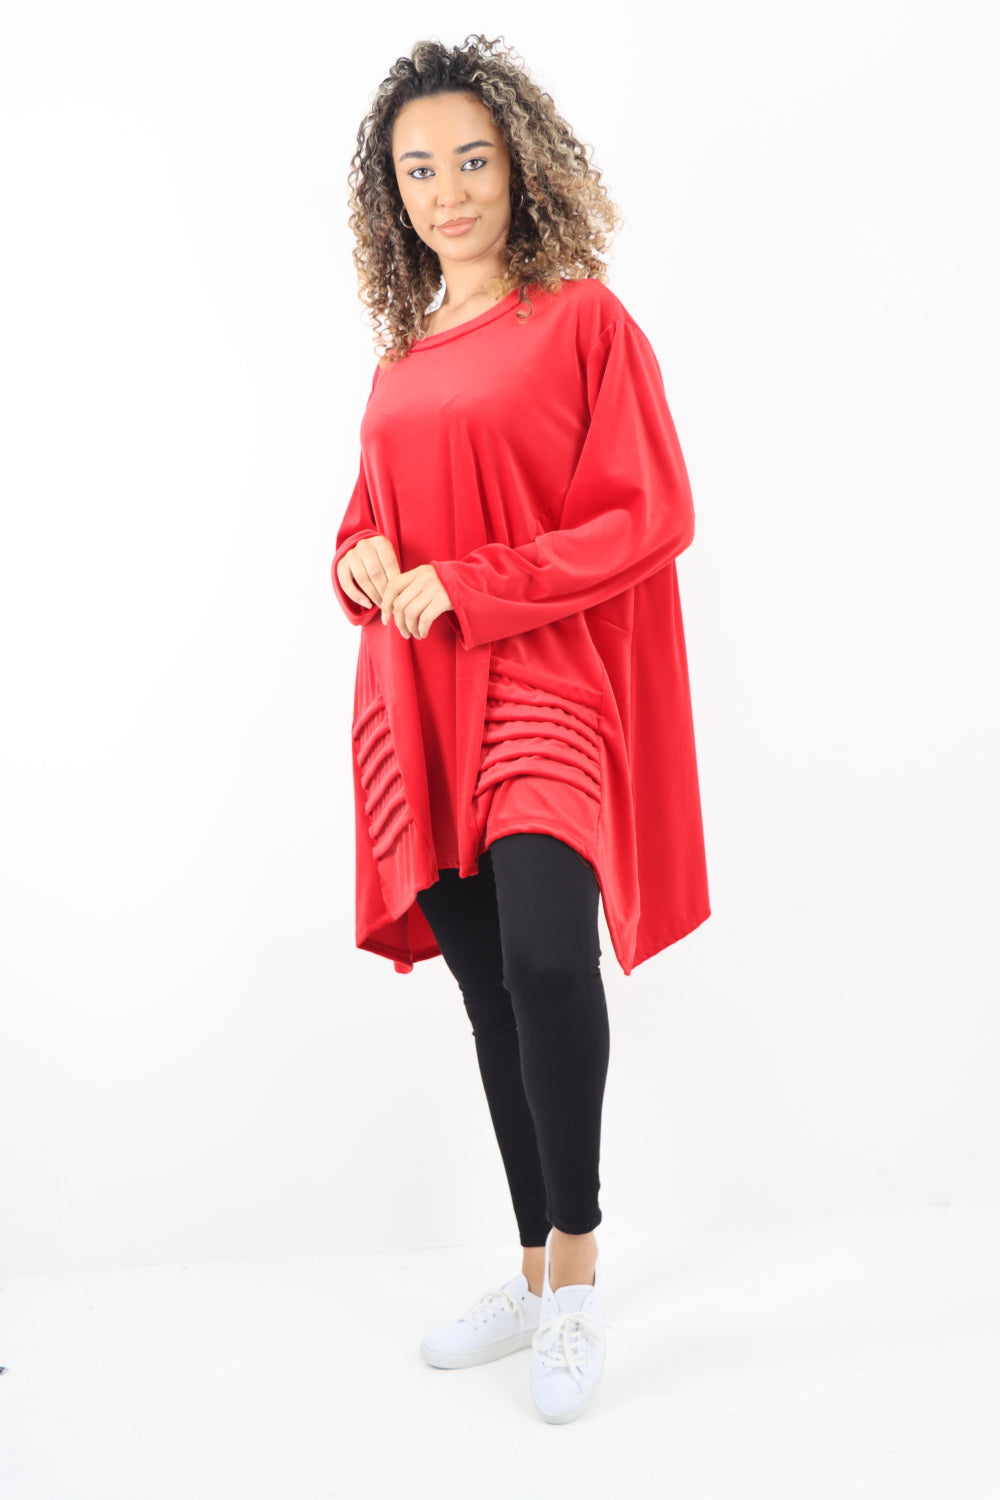 Oversized Velour Pleat Detail Long Sleeve  Round Neck Tunic Top